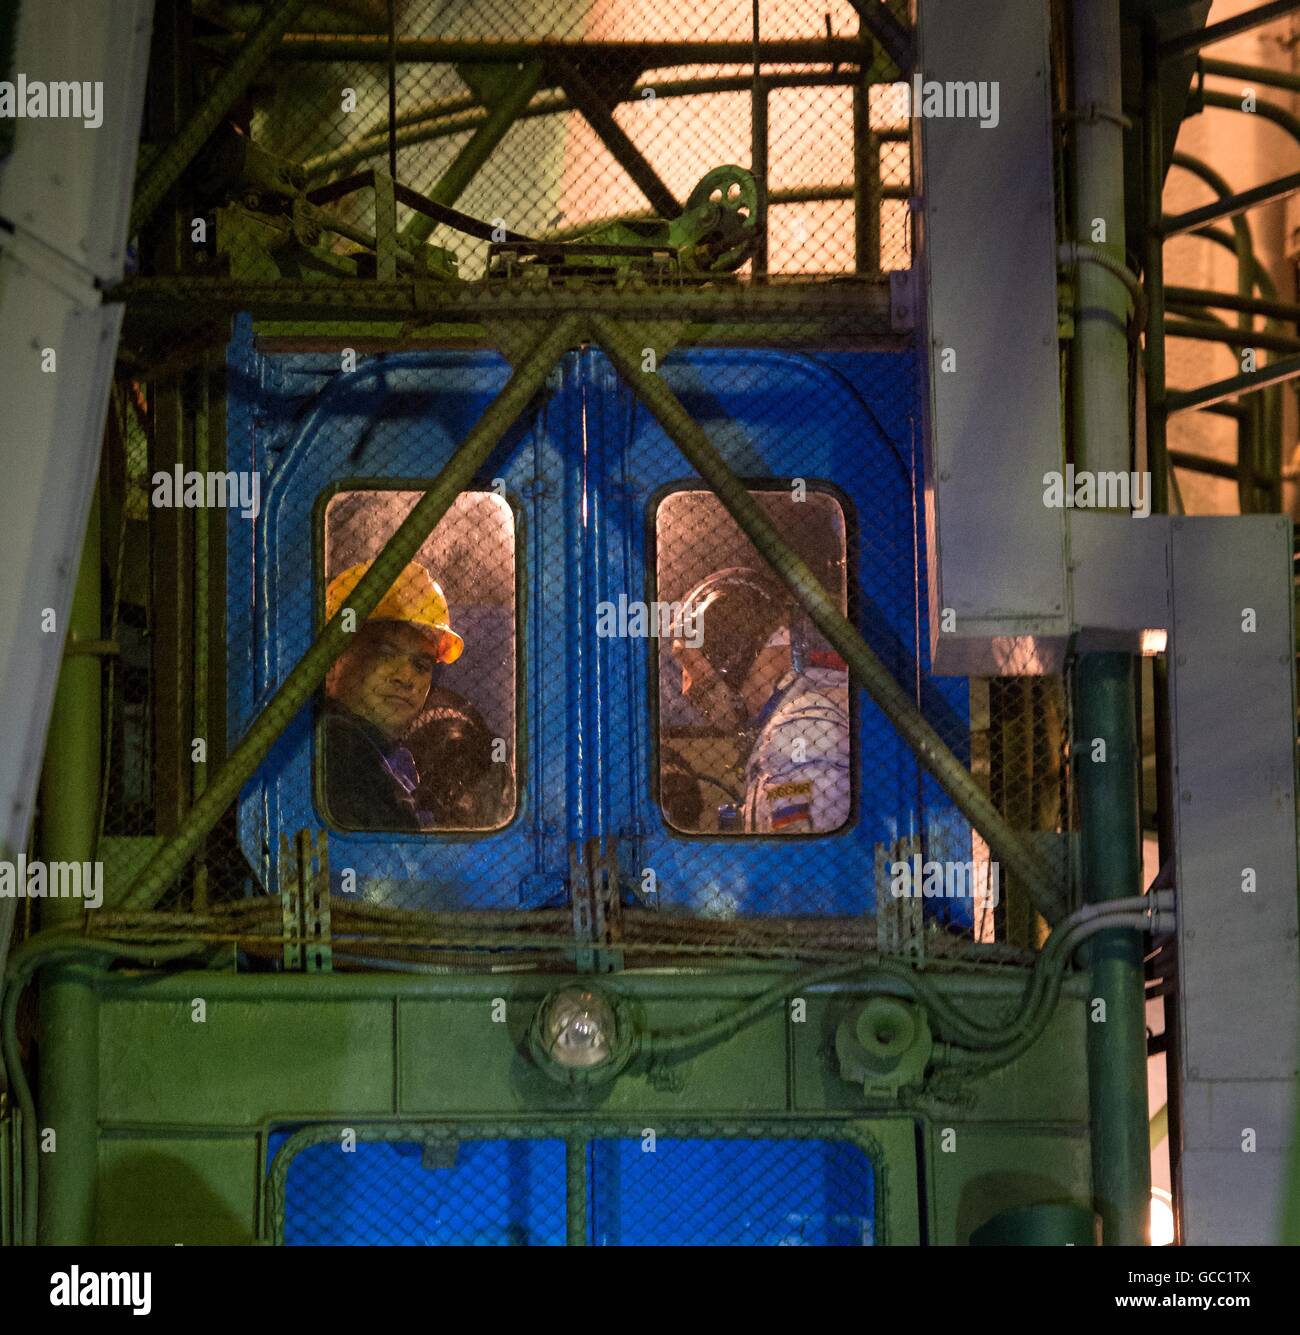 International Space Station Expedition 48 crew members ride the launch pad elevator to the Soyuz MS-01 spacecraft in preparation for launch July 7, 2016 at the Baikonur Cosmodrome in Kazakhstan. Crew members American astronaut Kate Rubins, Russian cosmonaut Anatoly Ivanishin and Japanese astronaut Takuya Onishi departed on four-month mission. Stock Photo